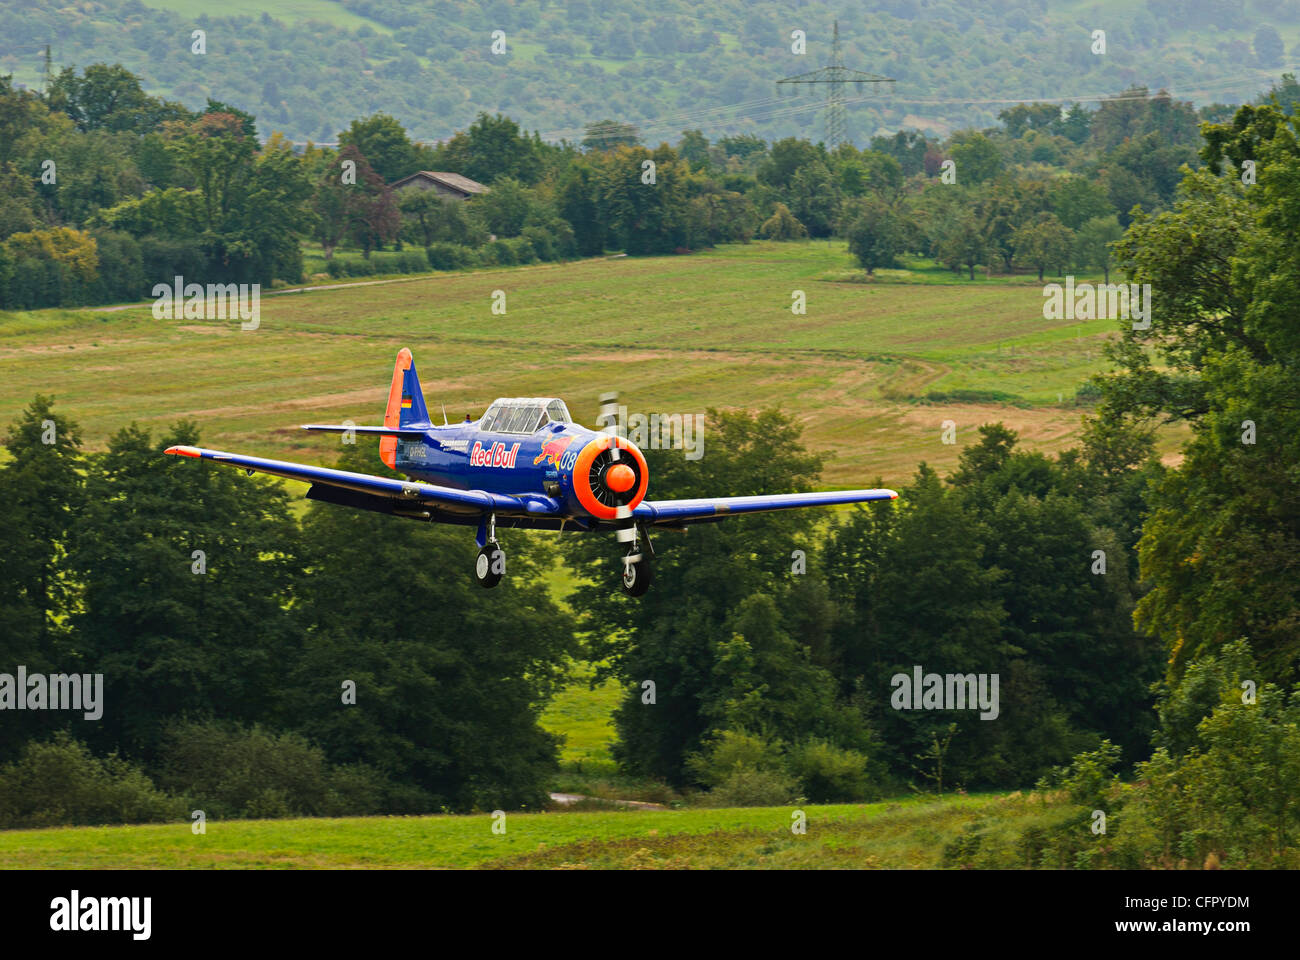 “1953” North American T6 “Red Bull” landing approach at the Hahnweide vintage air show, Kirchheim-Teck, Germany Stock Photo